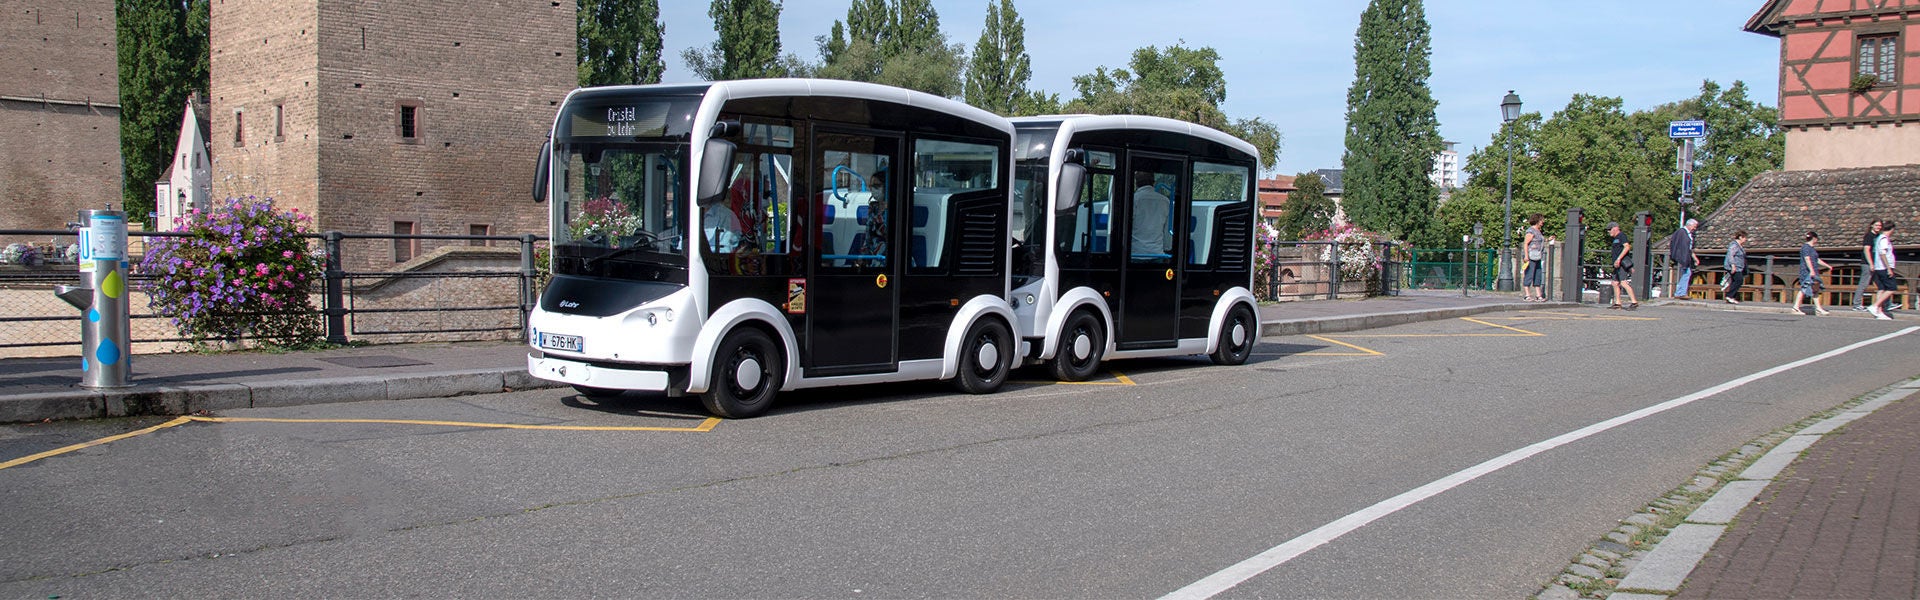 Cristal, the all-electric modular shuttle system with Webasto Battery Management